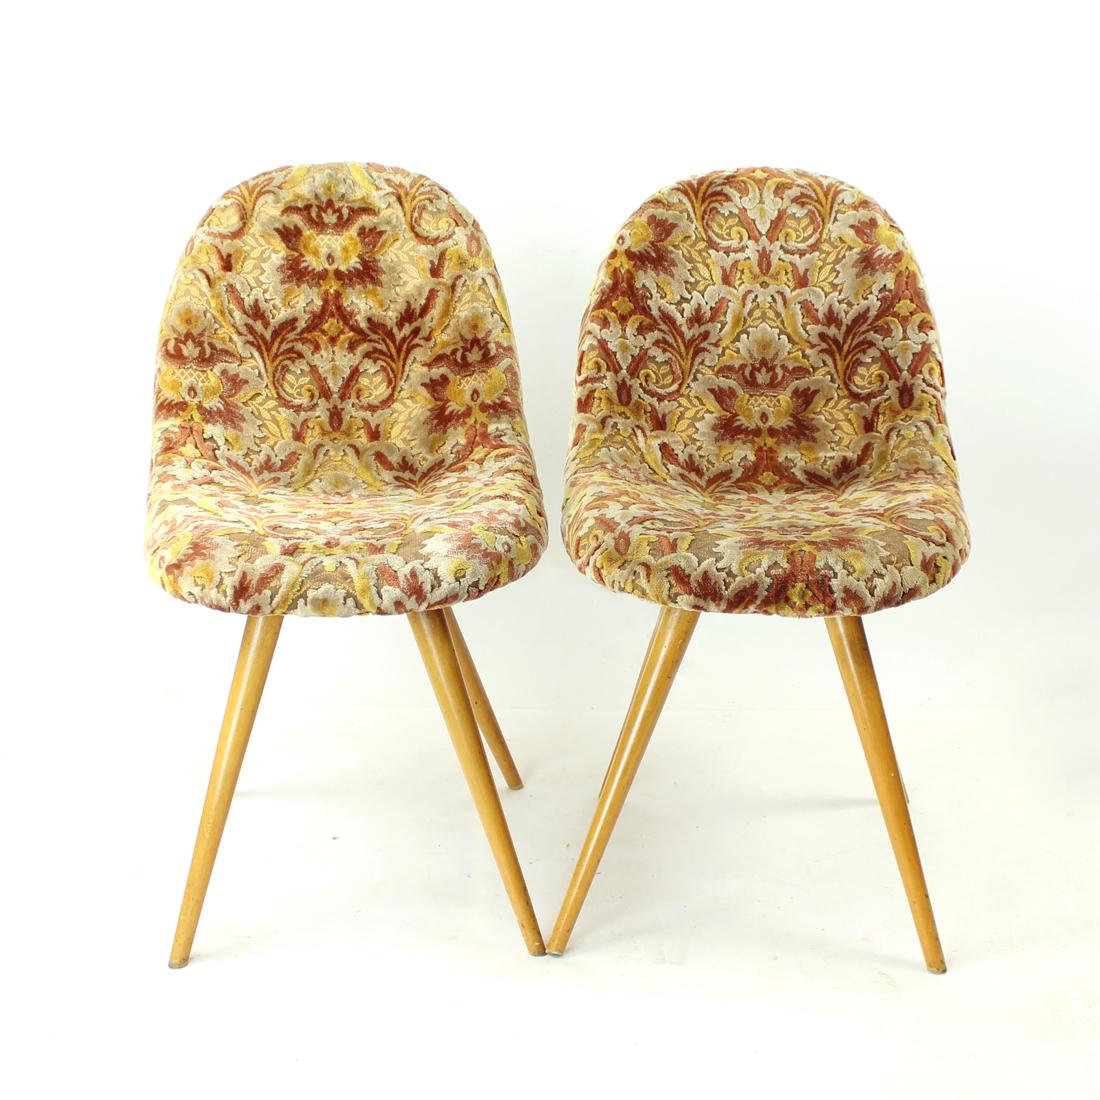 Pair of original shell chairs from Czechoslovakia. Produced in 1960s, designed by Miroslav Navratil. The chairs are unique in design and very typical for the original era. Elegant lines and soft touch of the velvet fabric make a great combination of